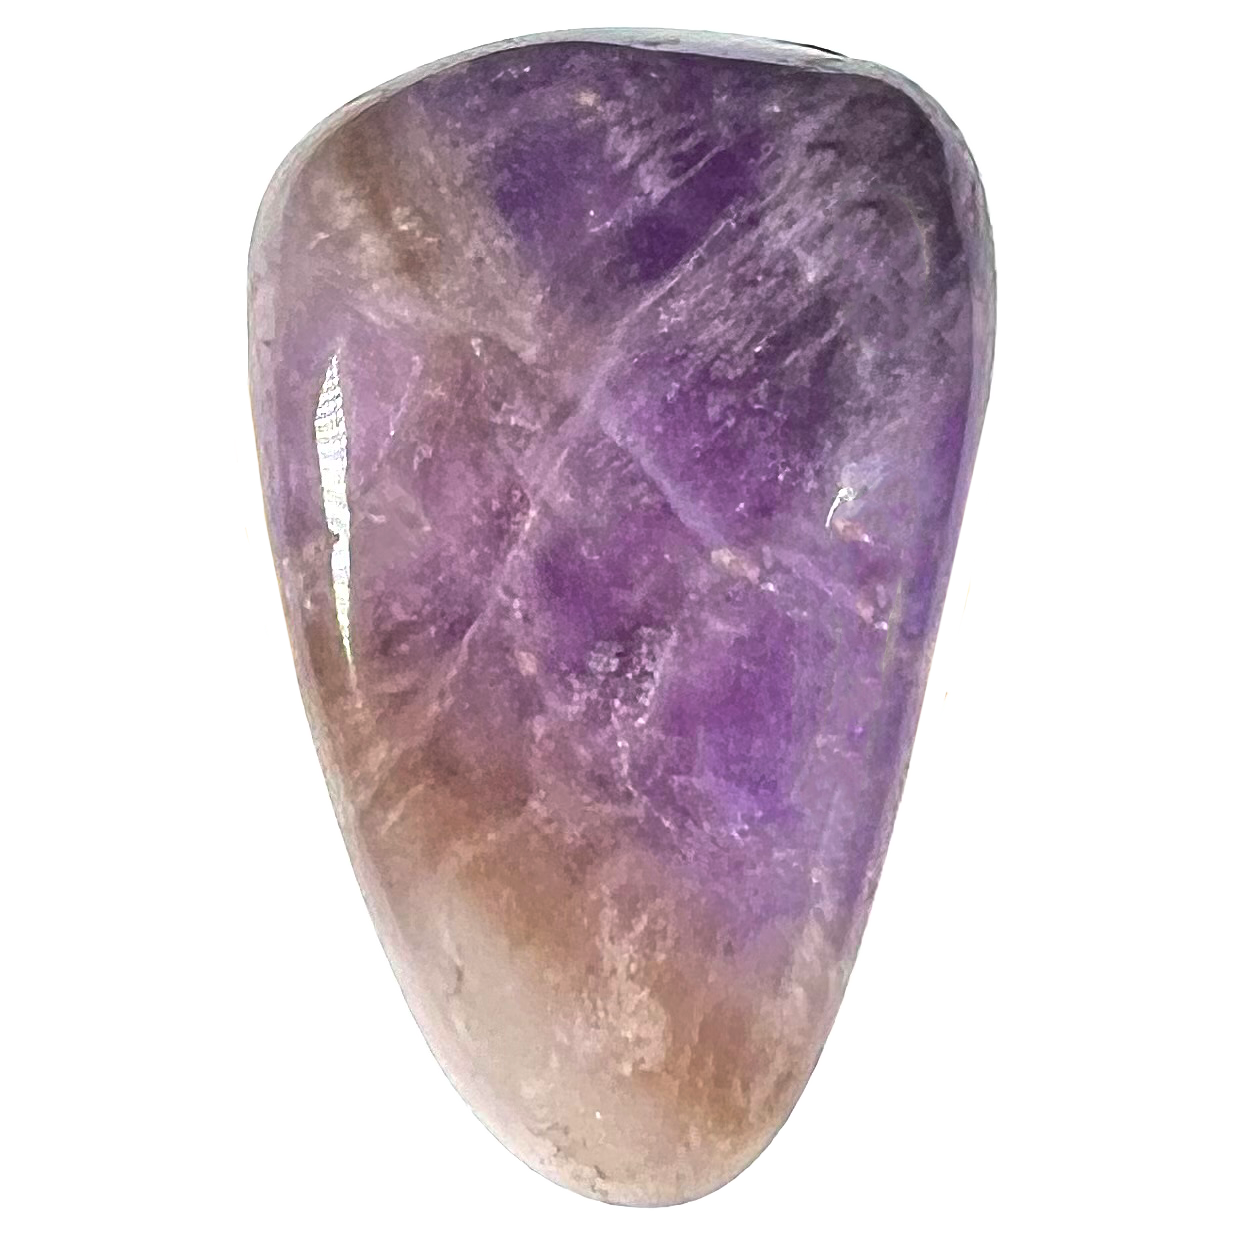 A tumbled Brandberg amethyst stone.  The stone is purple amethyst with inclusions of white quartz and yellowish brown smoky quartz.